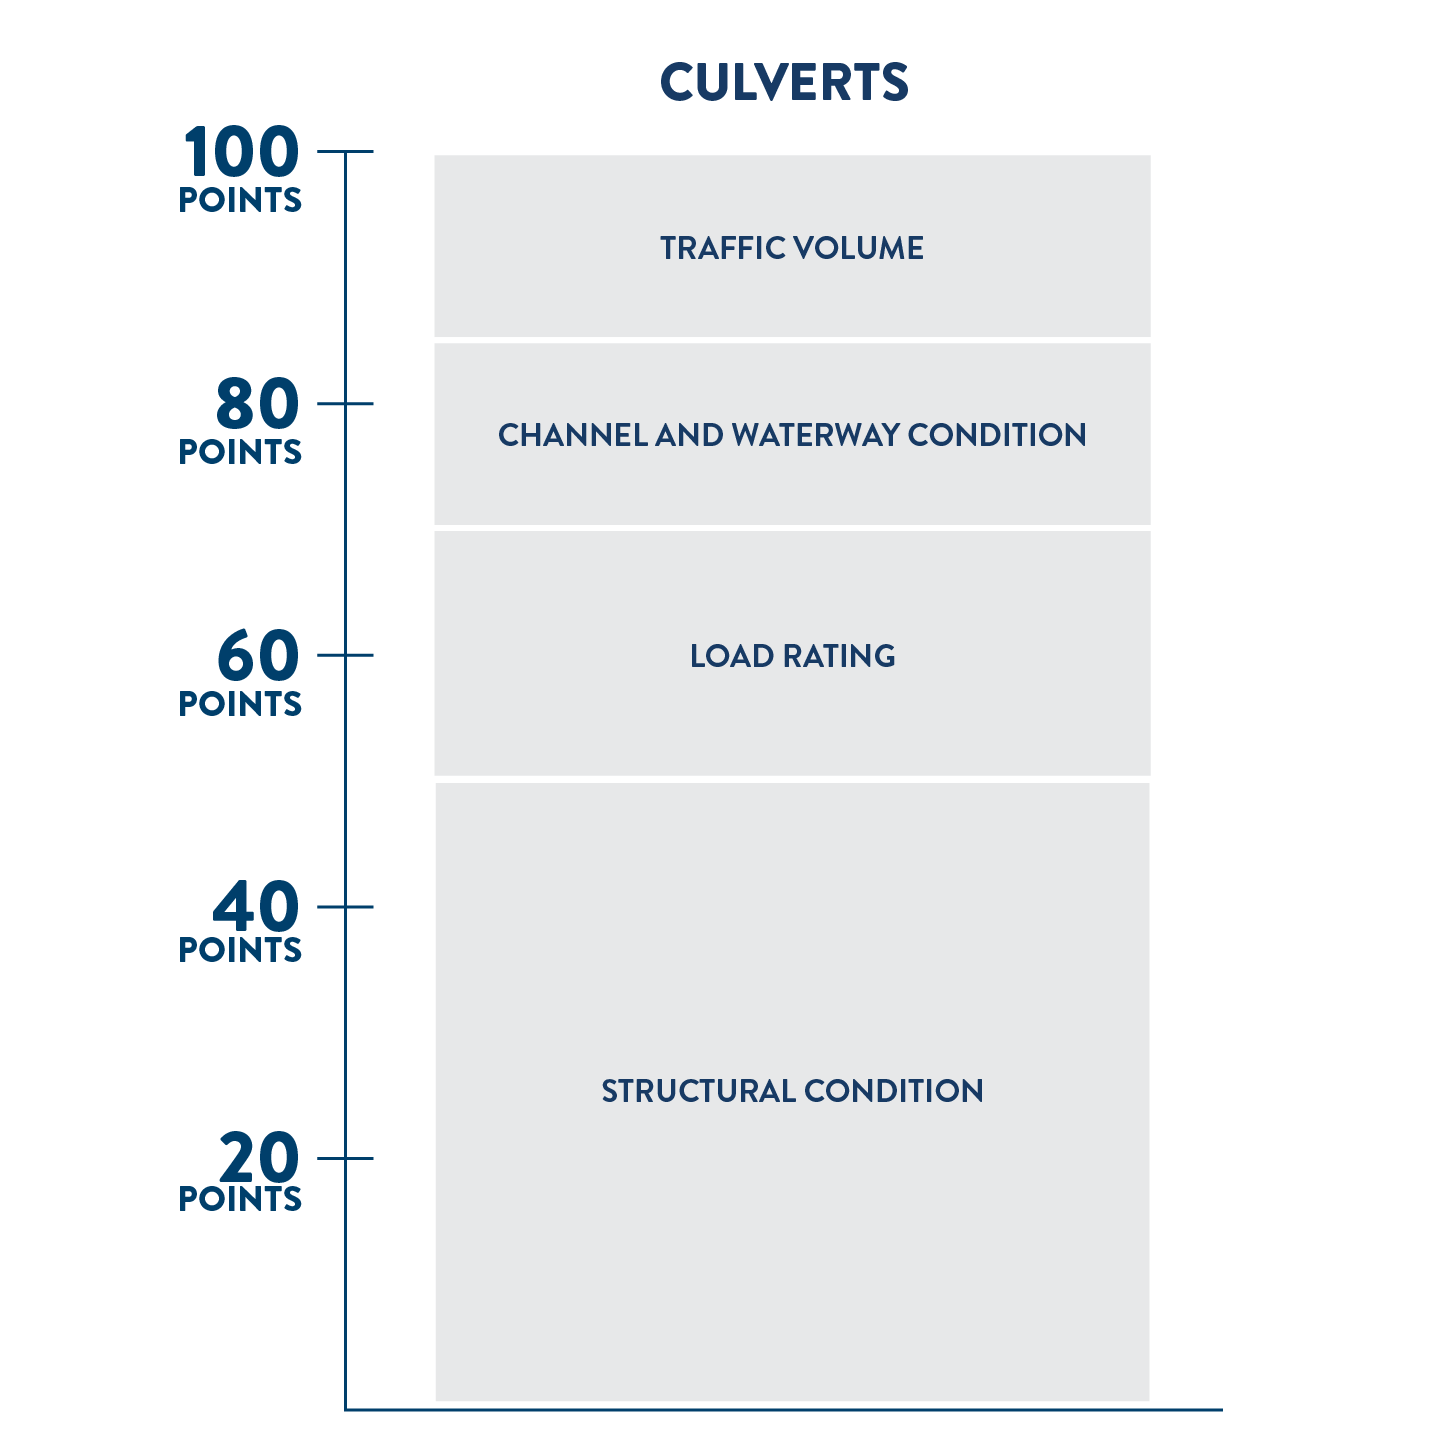 Scoring criteria for standalone non-national highway system culvert projects. Out of 100 possible points, 50 points are based on the structural condition of the culvert, 20 points are based on the load rating, 15 points are based on the condition of the waterway and channel, and 15 points are based traffic volume. 